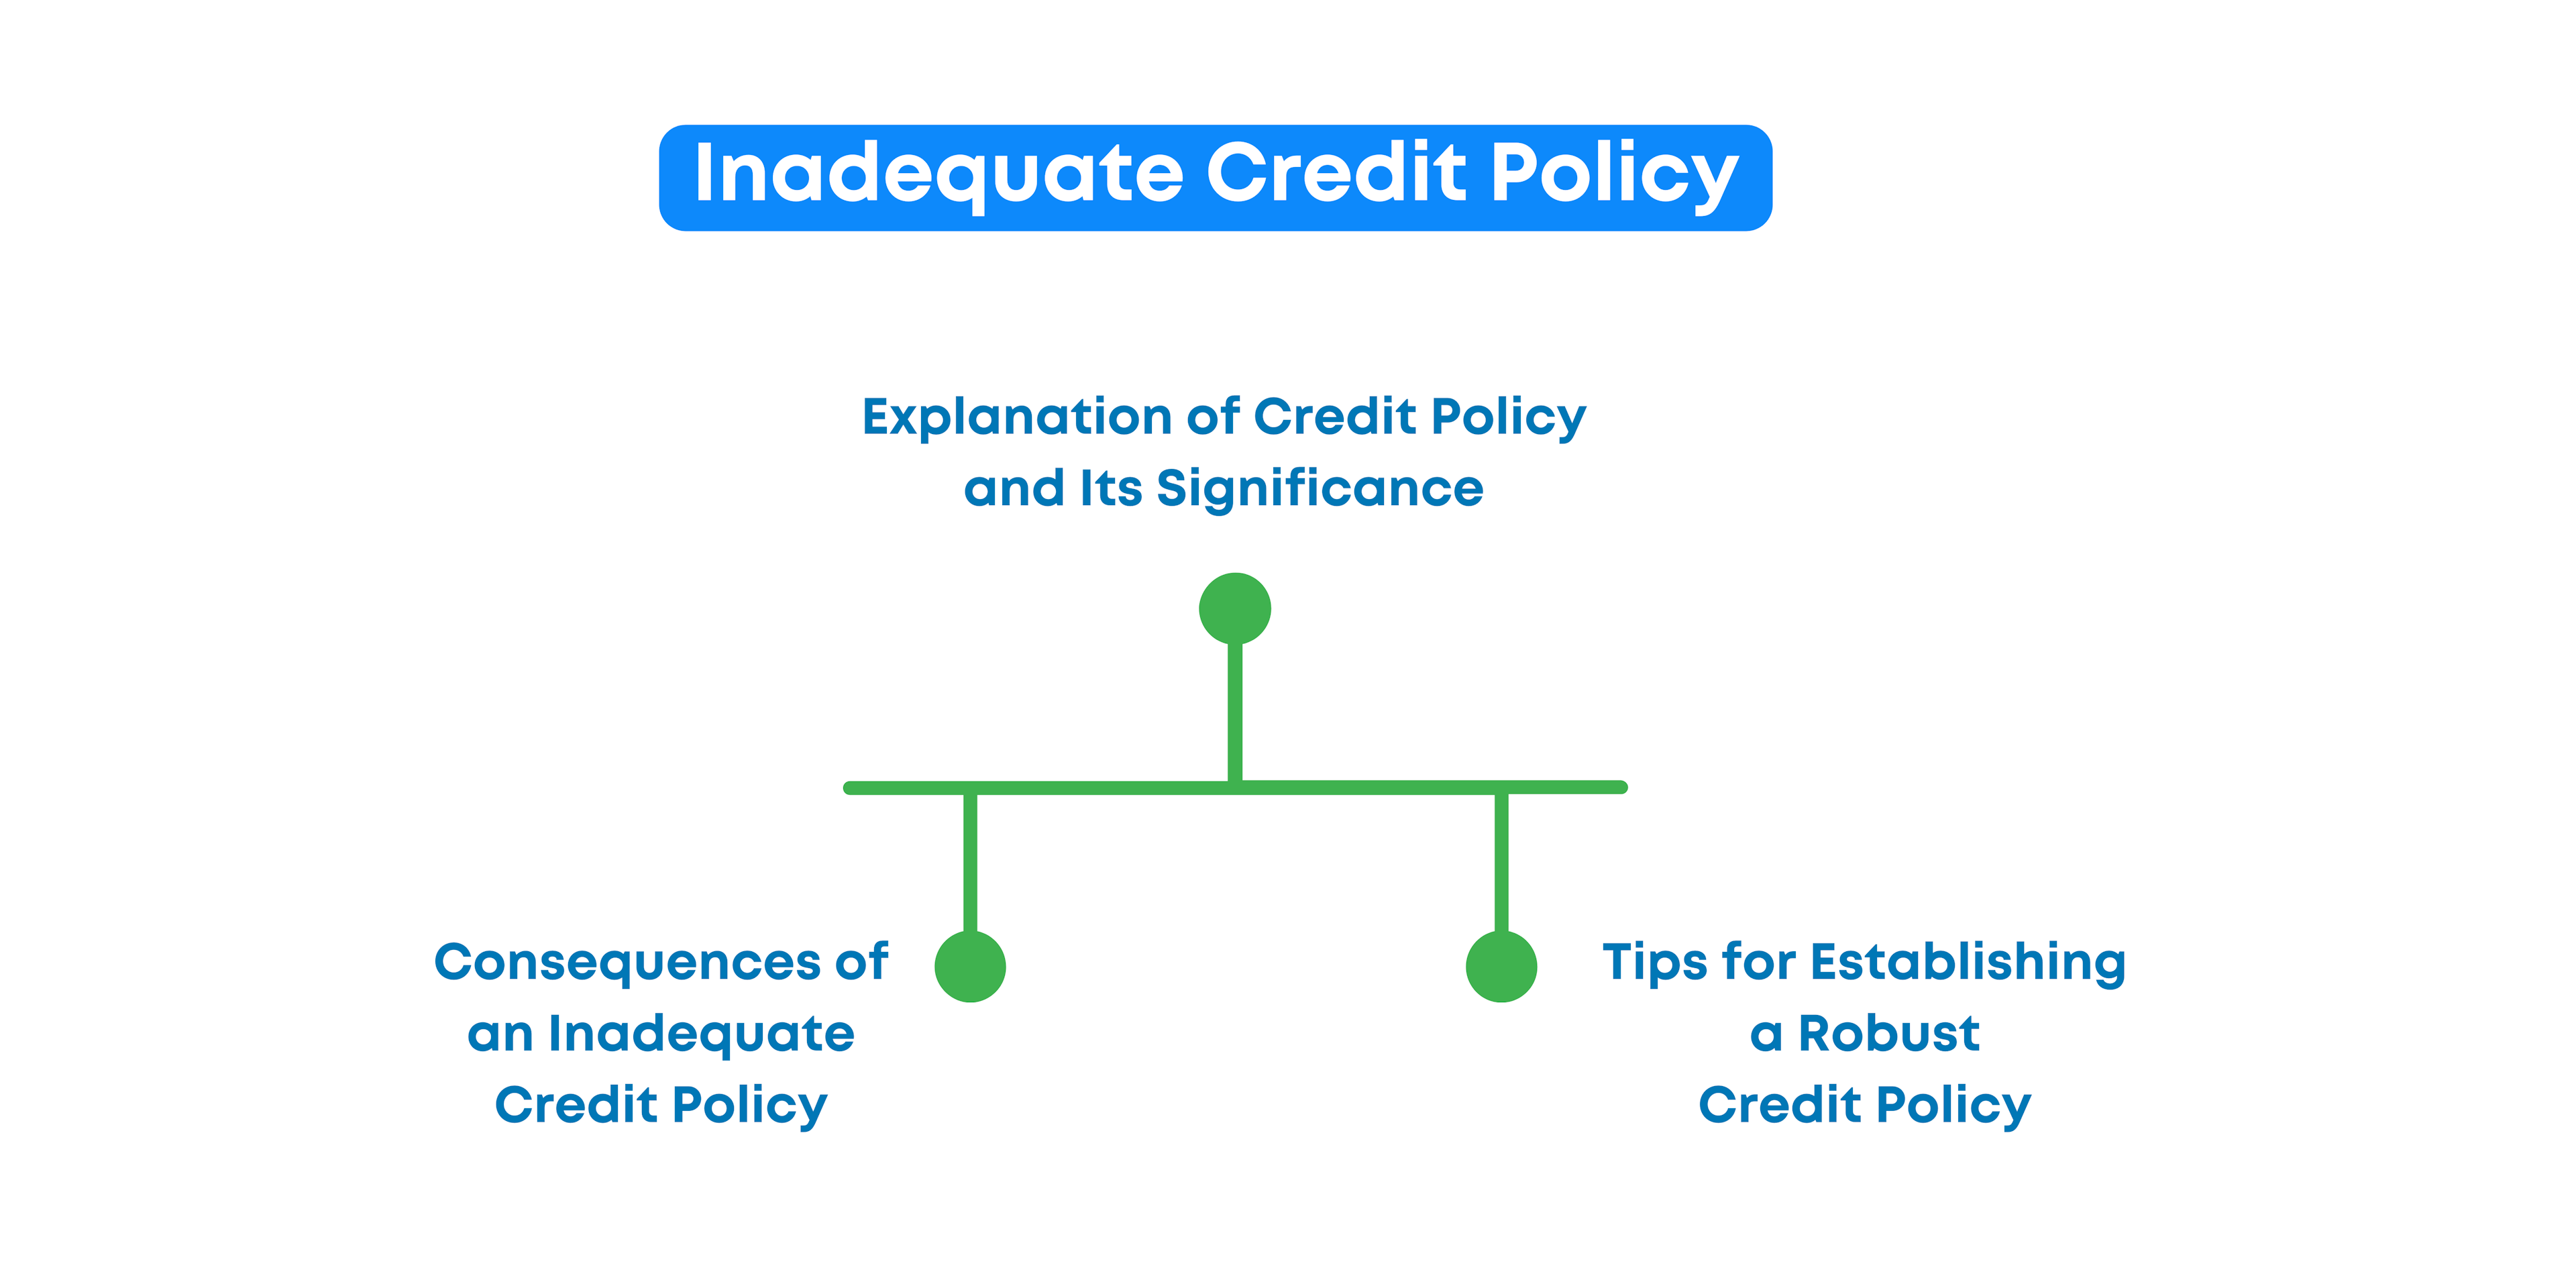 Inadequate Credit Policy